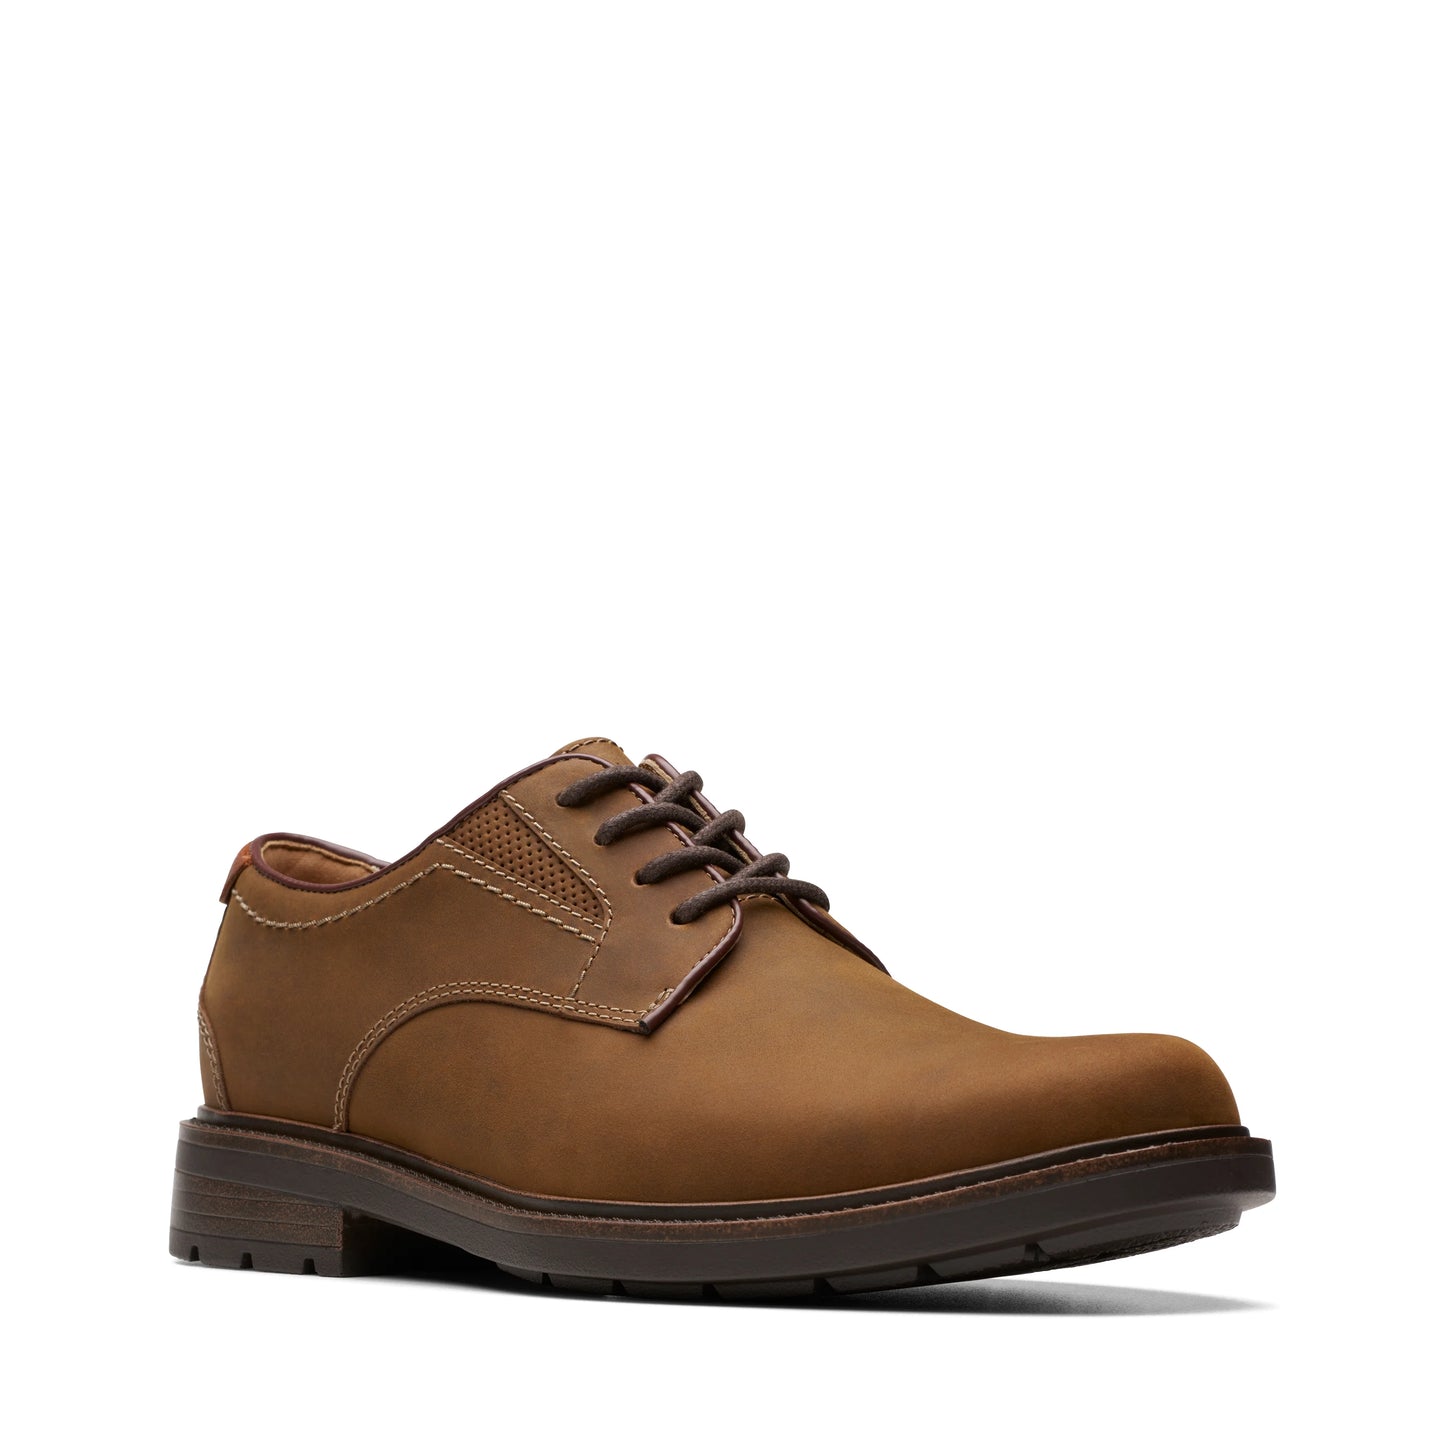 CLARKS | ZAPATOS DERBY HOMBRE | UN SHIRE LOW BEESWAX LEATHER | AMARILLO